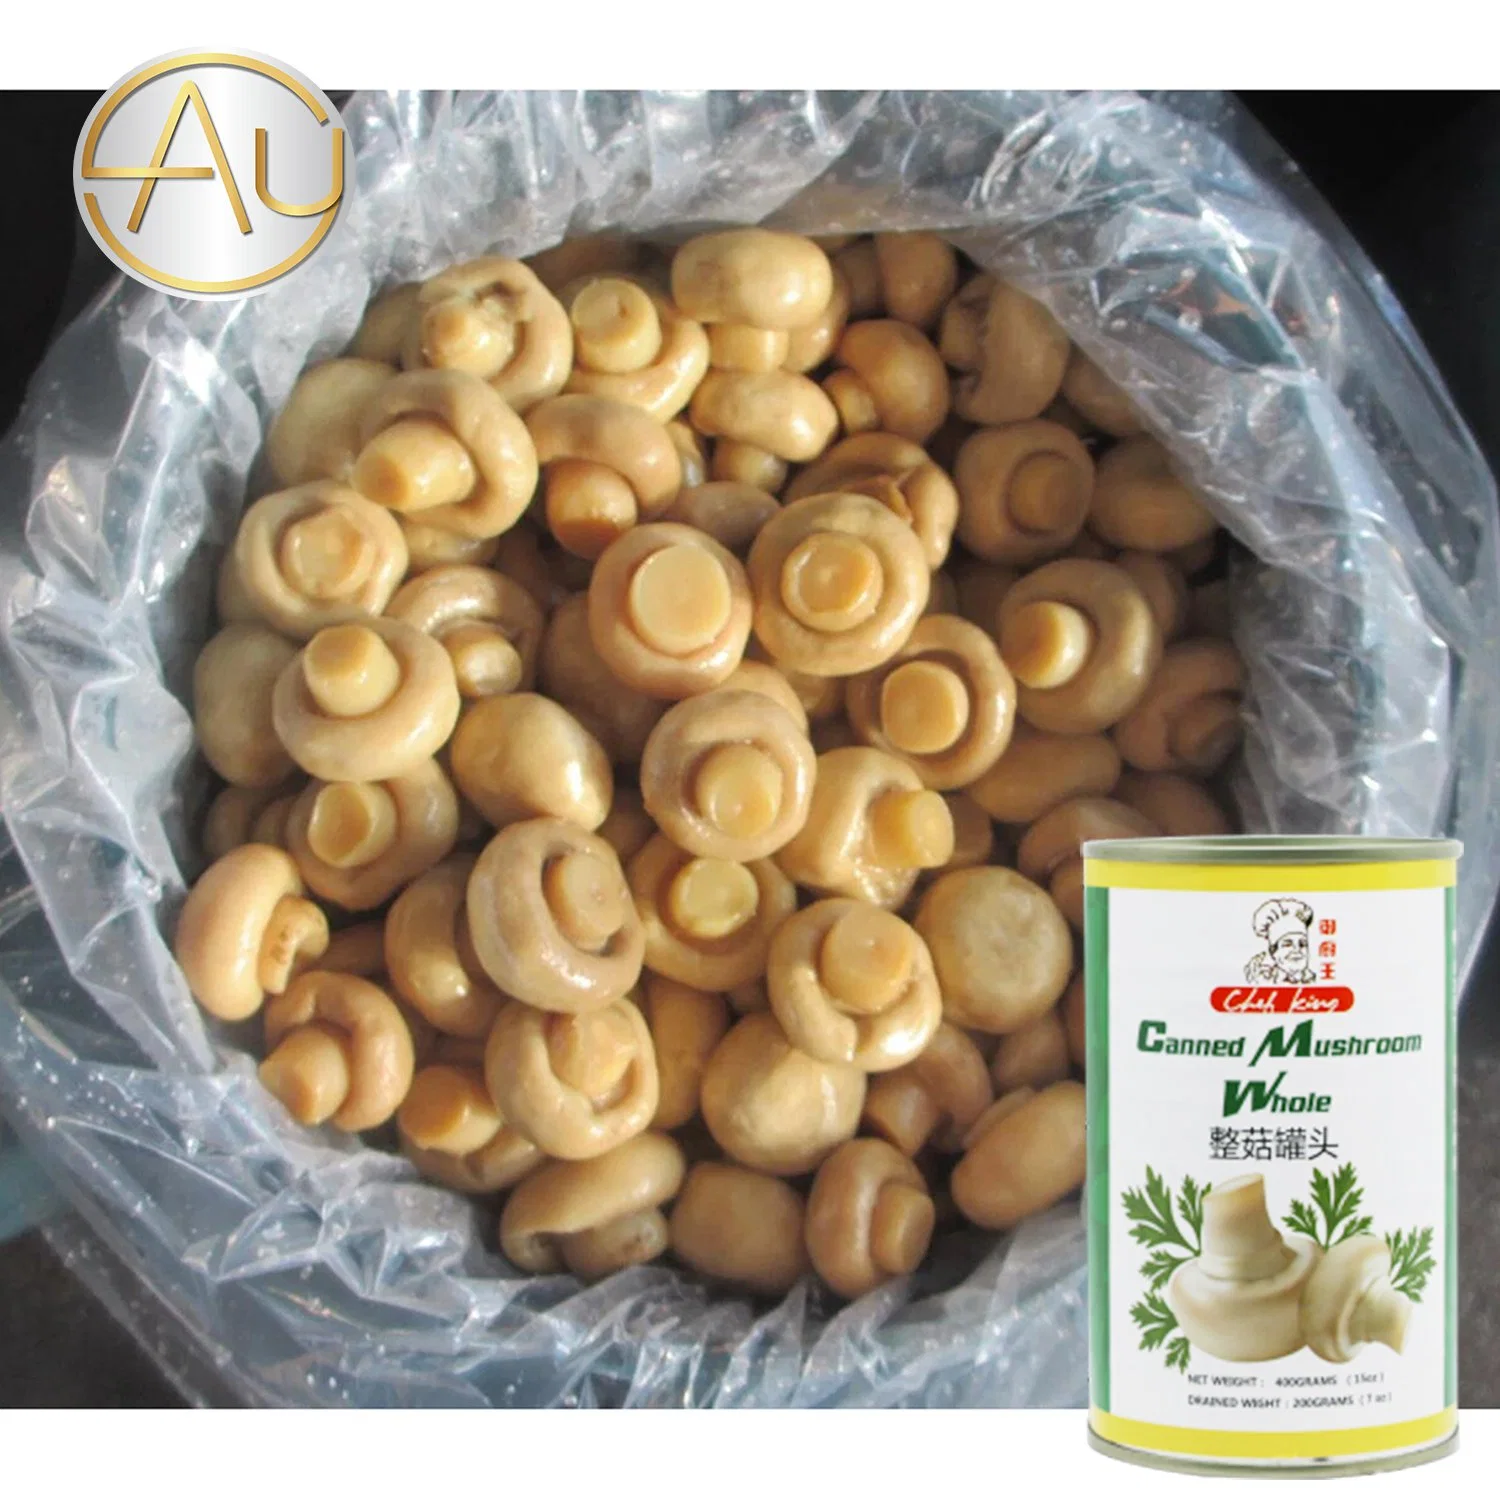 Green Vegetables in Tin Packing Canned Food Mushroom